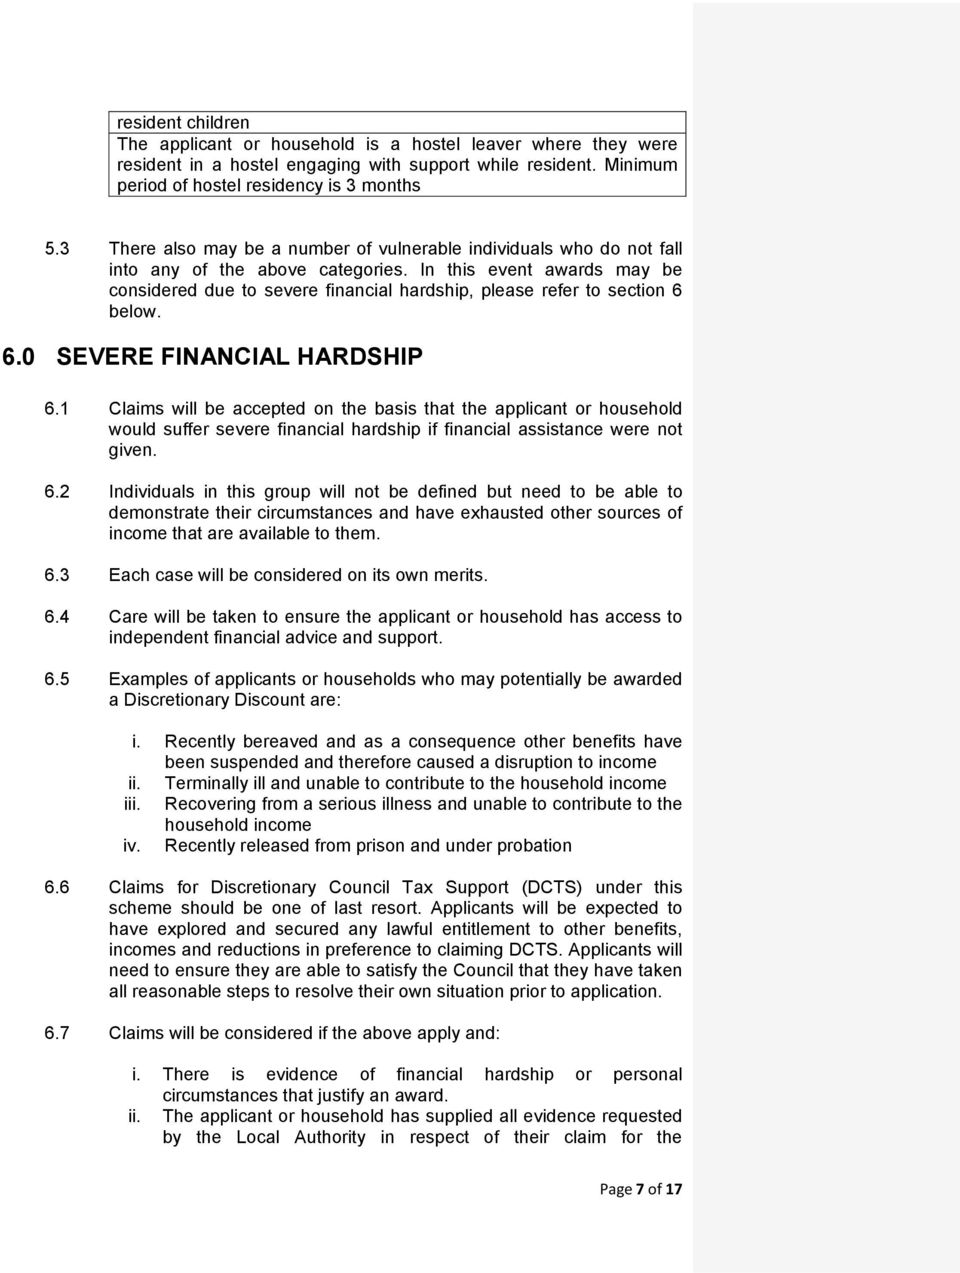 In this event awards may be considered due to severe financial hardship, please refer to section 6 below. 6.0 SEVERE FINANCIAL HARDSHIP 6.